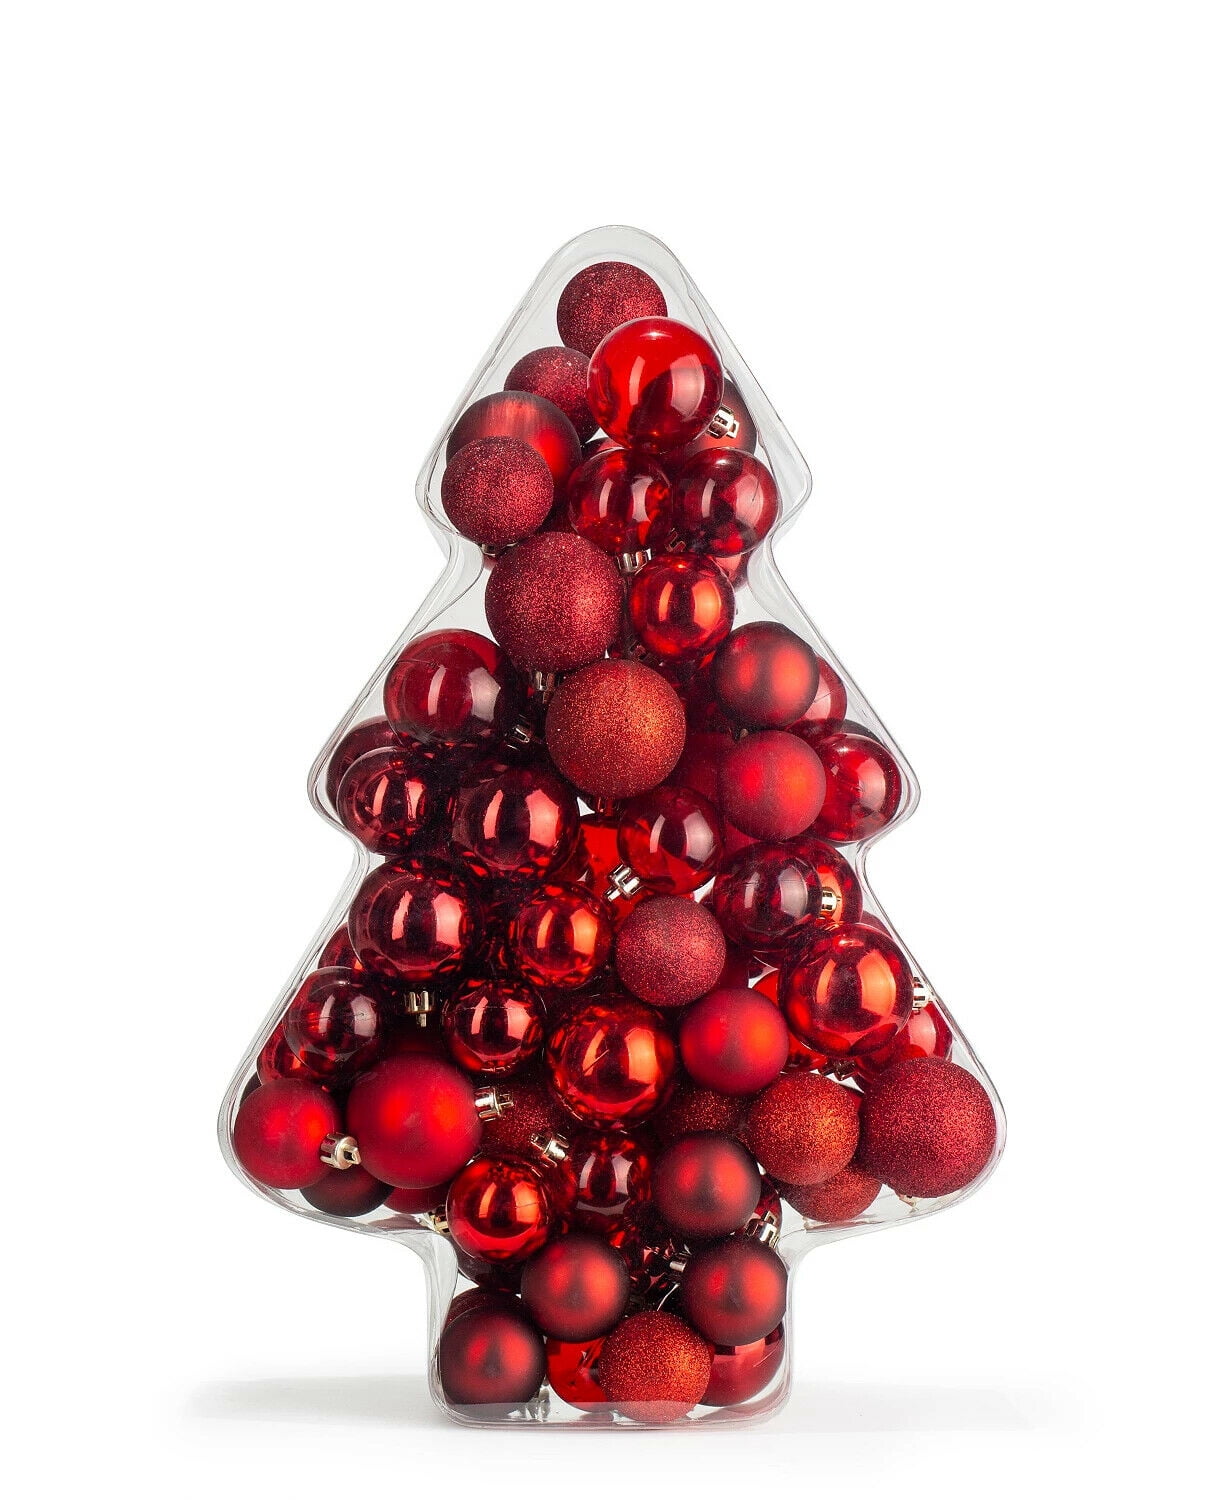 Visland 5PCS Clear Christmas Ball, 3.14 Inches Fillable Christmas  Ornaments, Clear Plastic Ornaments Filled with Pine Snow Berry for Craft 